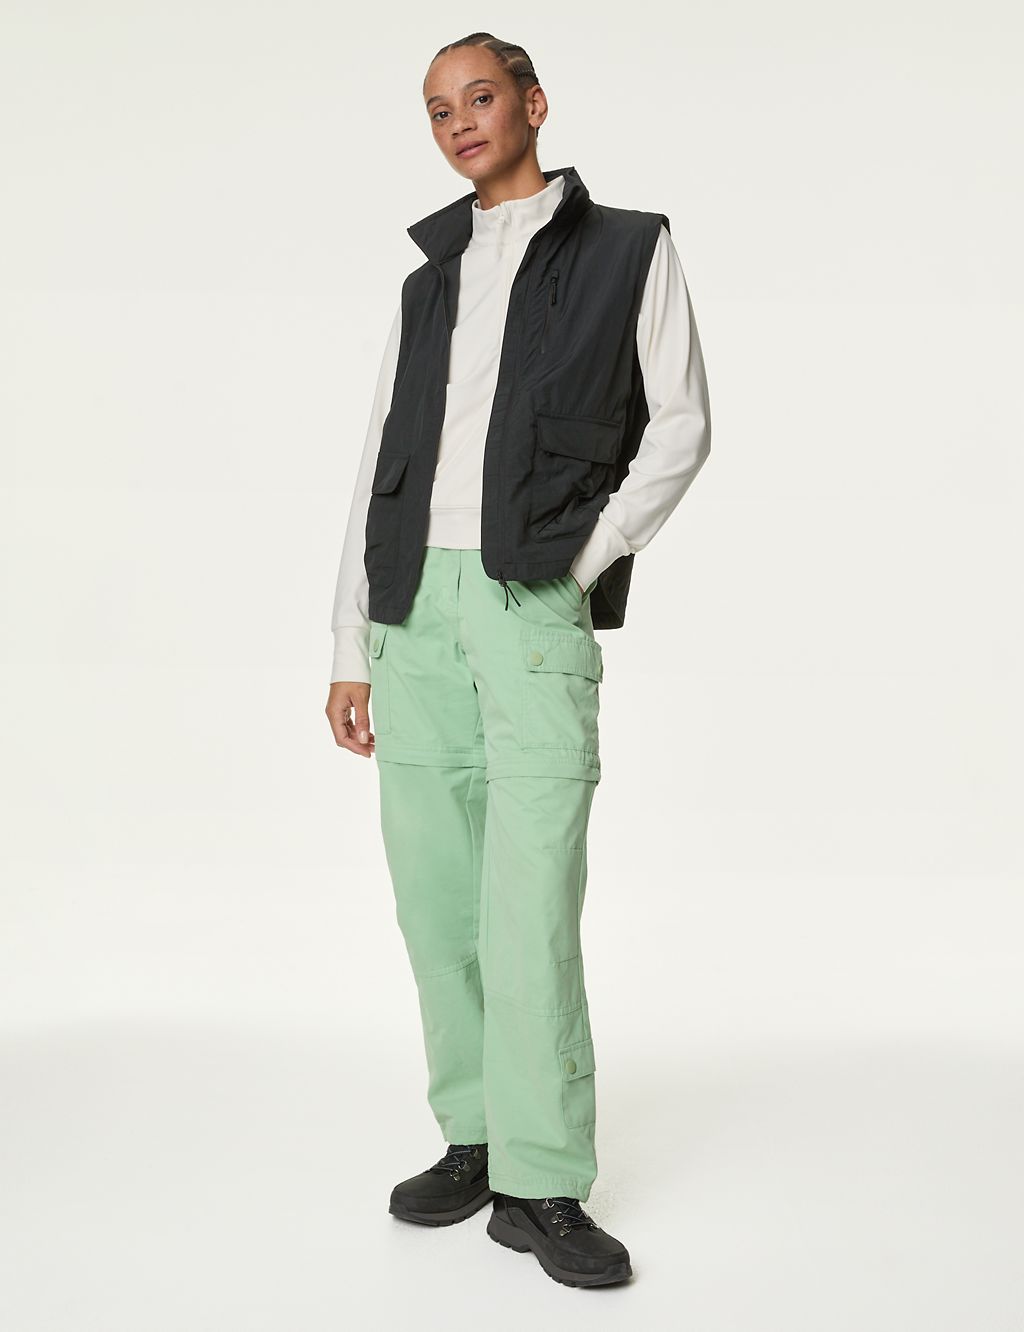 Convertible Sports Jacket with Stormwear™ 4 of 8